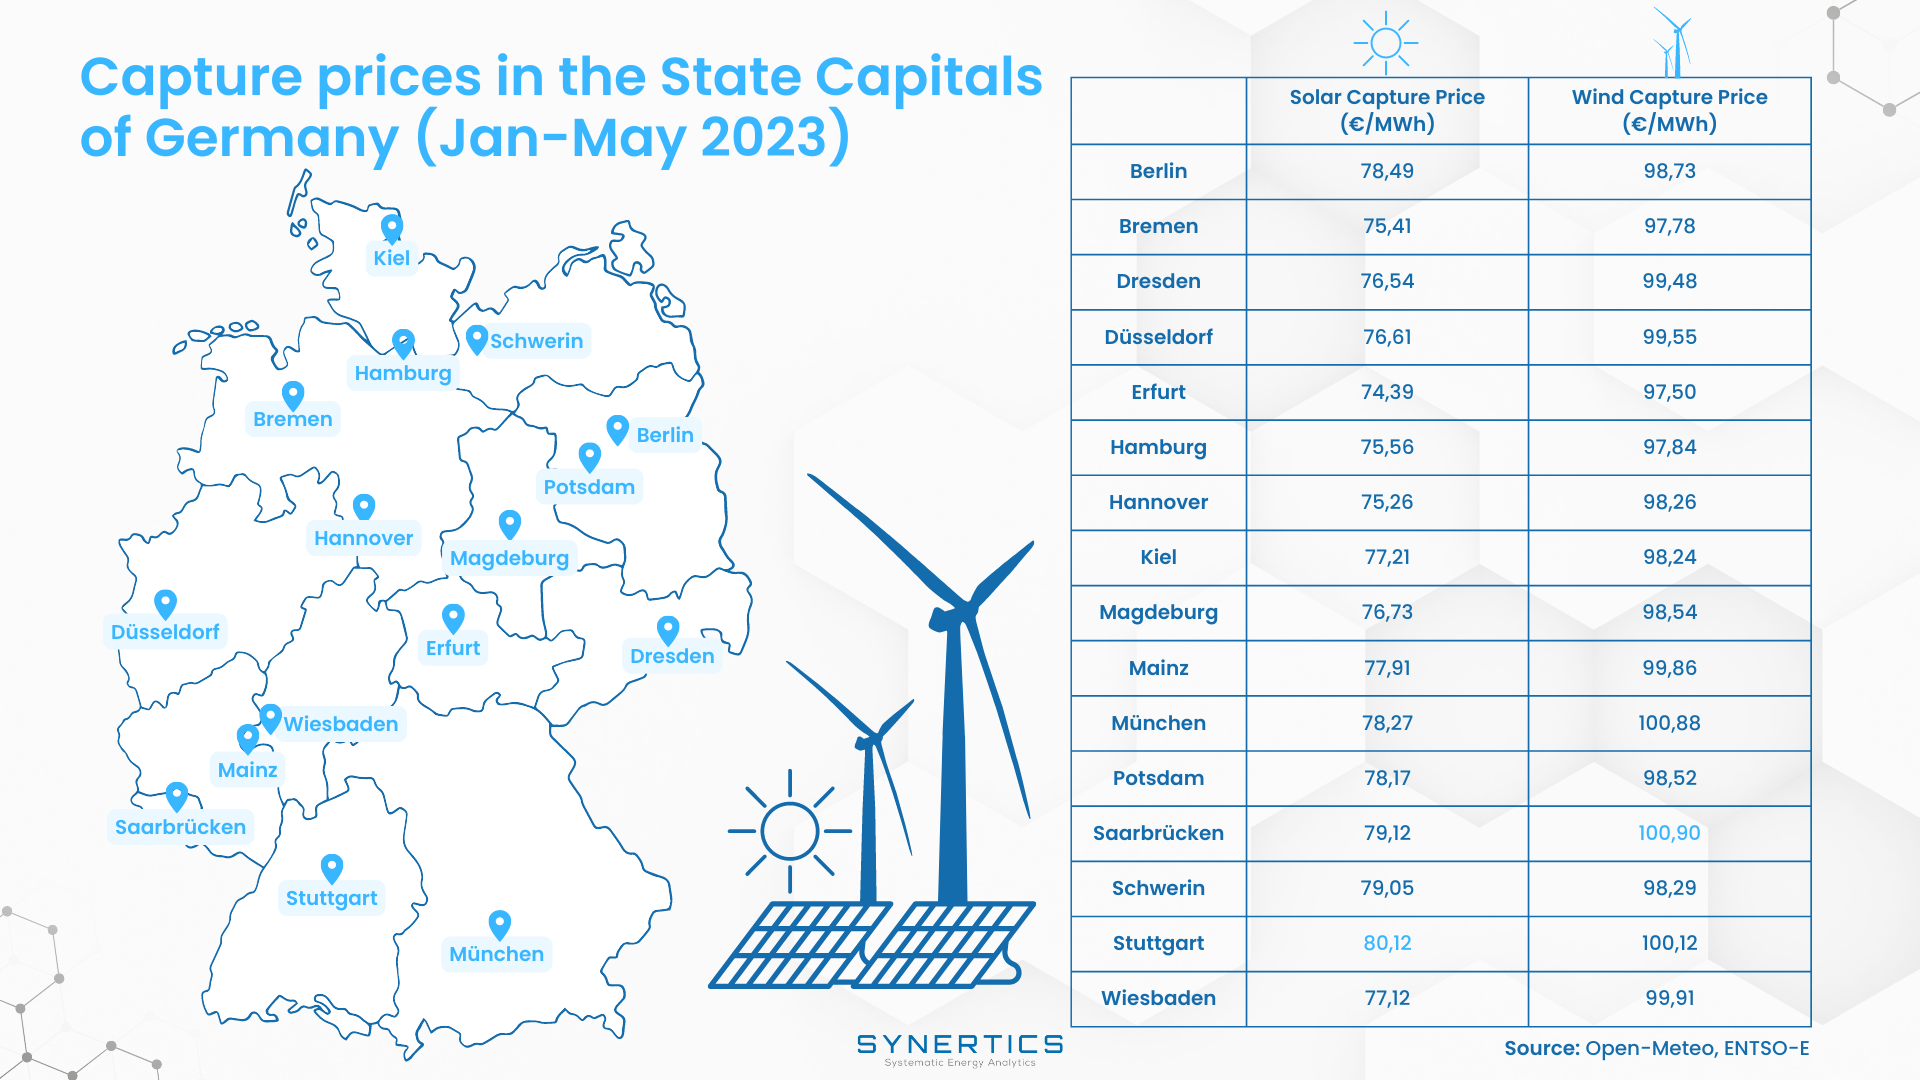 State Capitals of Germany and their Capture Prices for Jan-May 2023